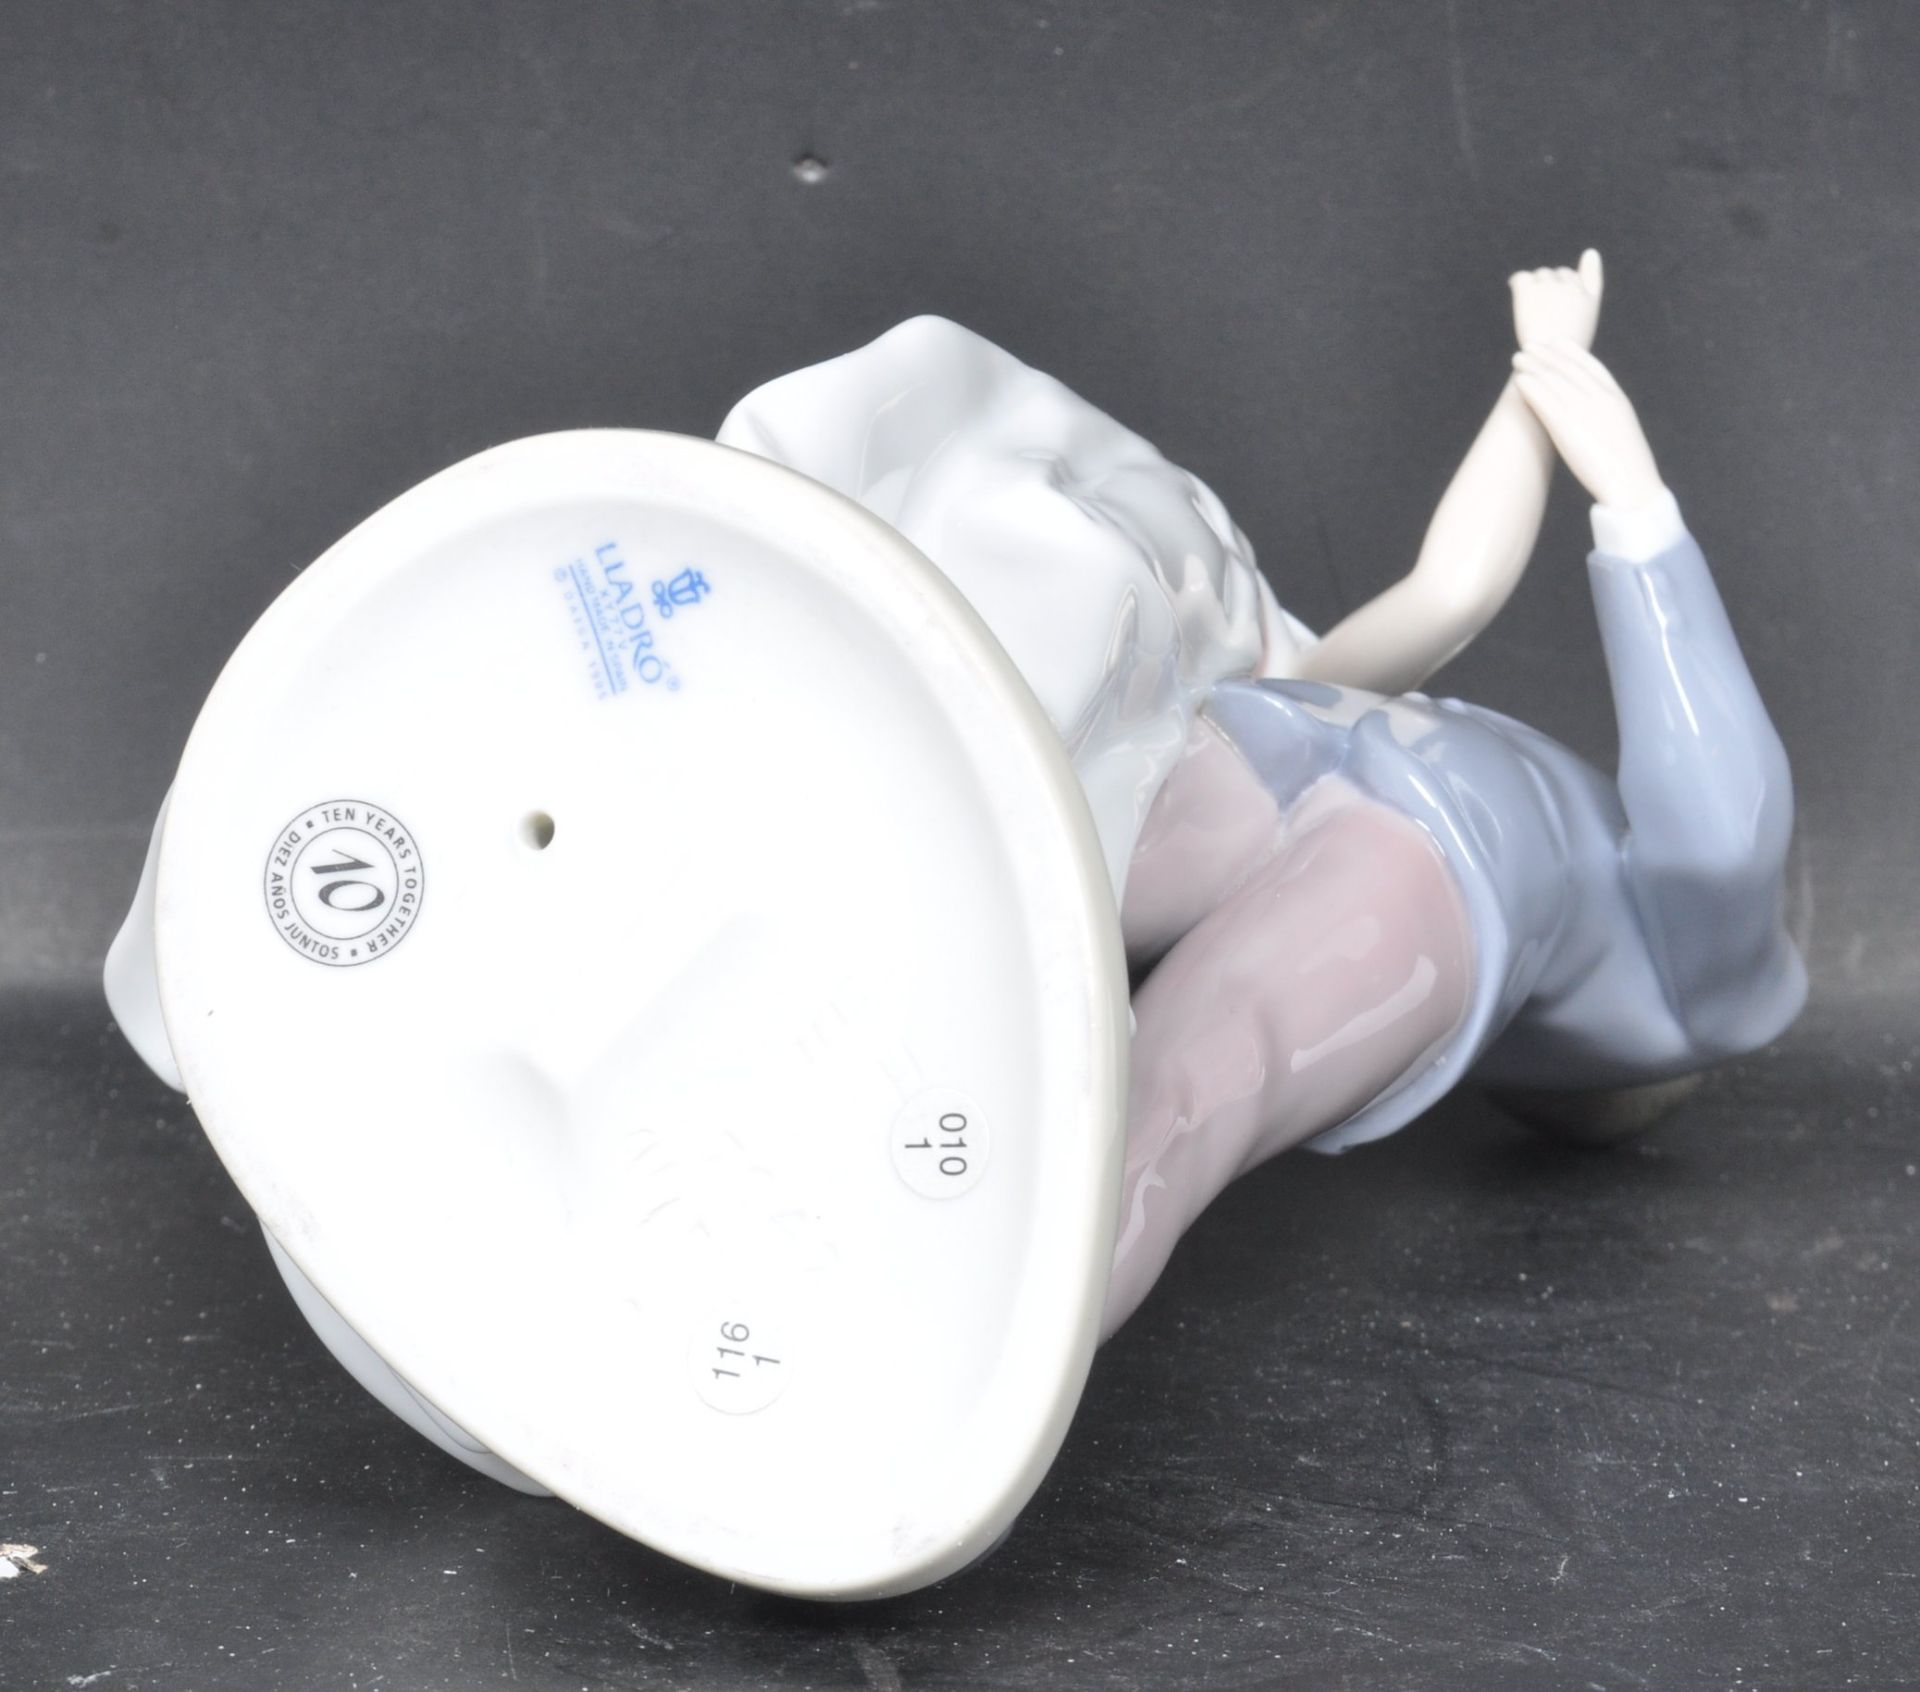 LLADRO 7642 - NOW AND FOREVER CERAMIC PORCELAIN FIGURINE - Image 6 of 6